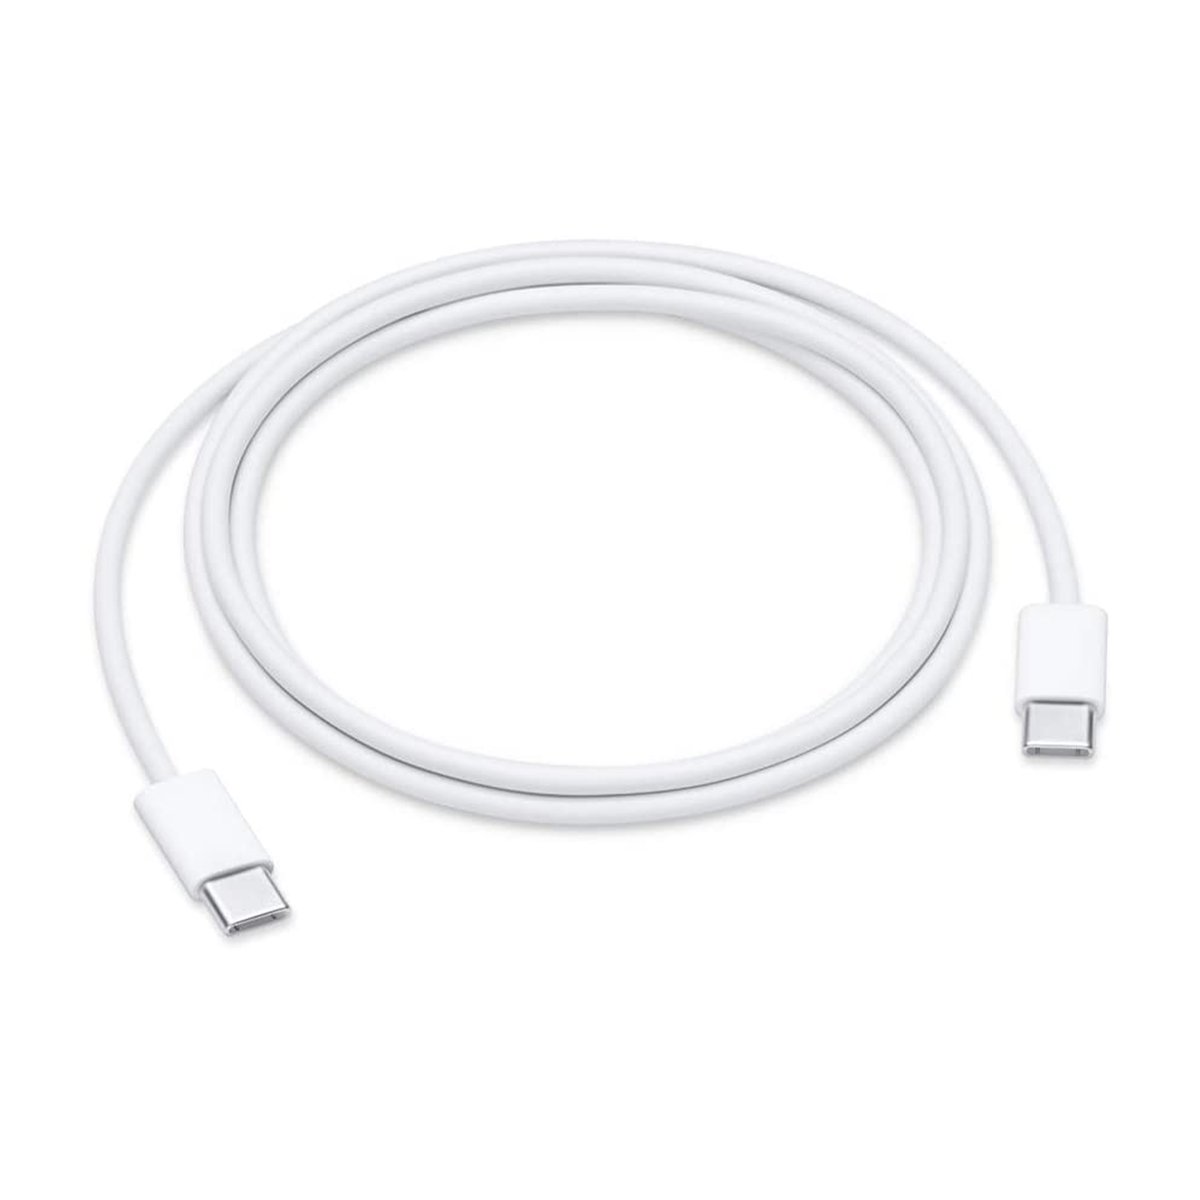 Buy Apple USB-C Charge Cable MUF72ZM 1M Online at Best Price | PC Cables | Lulu Kuwait in Saudi Arabia